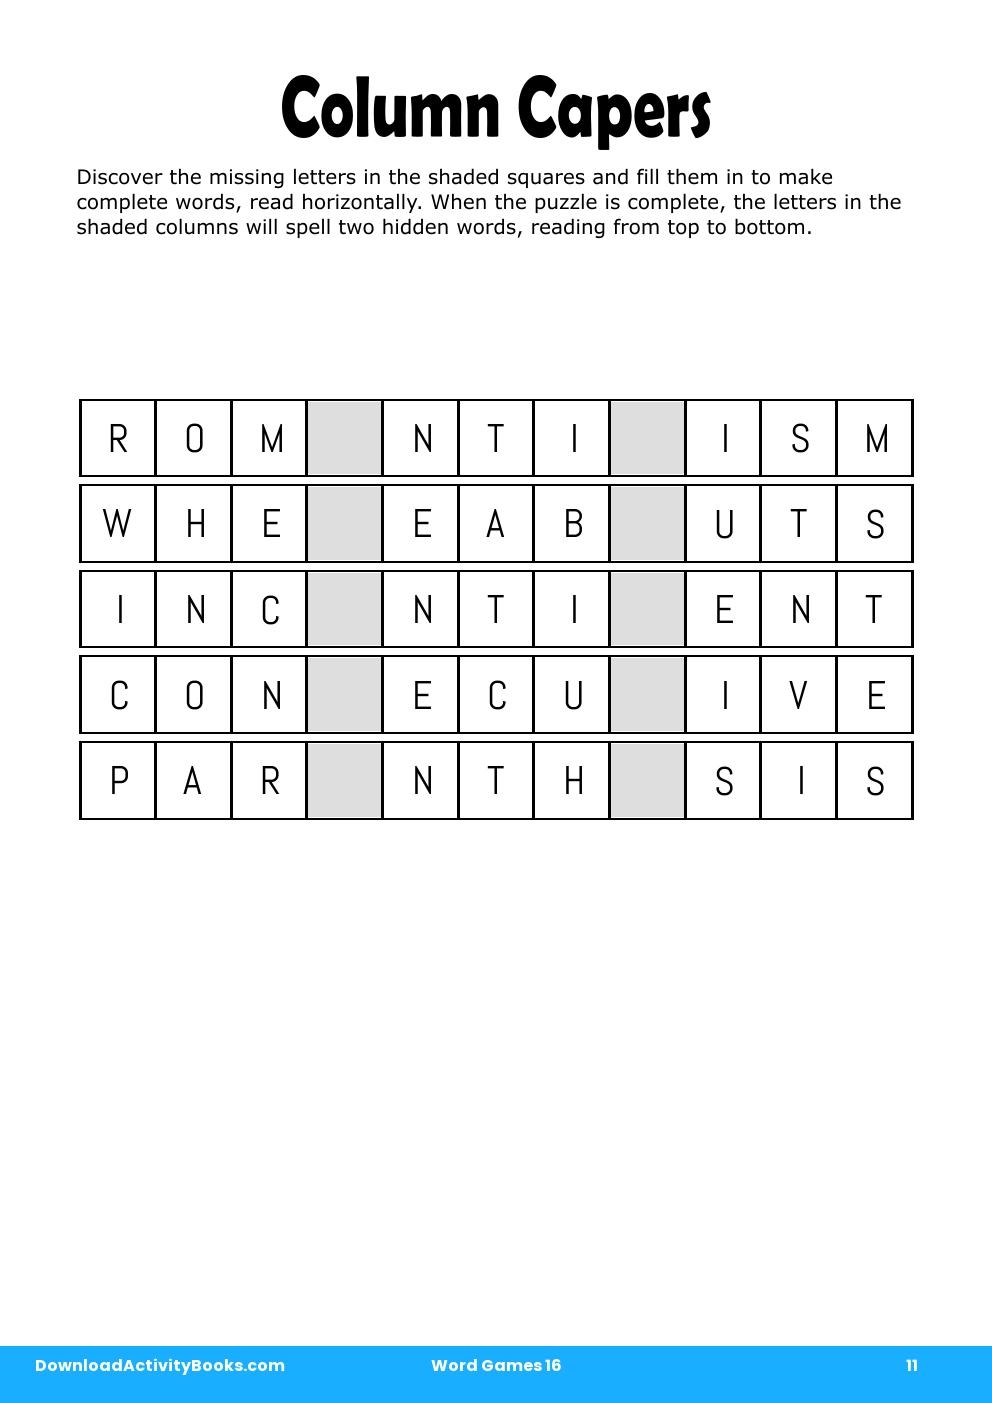 Column Capers in Word Games 16